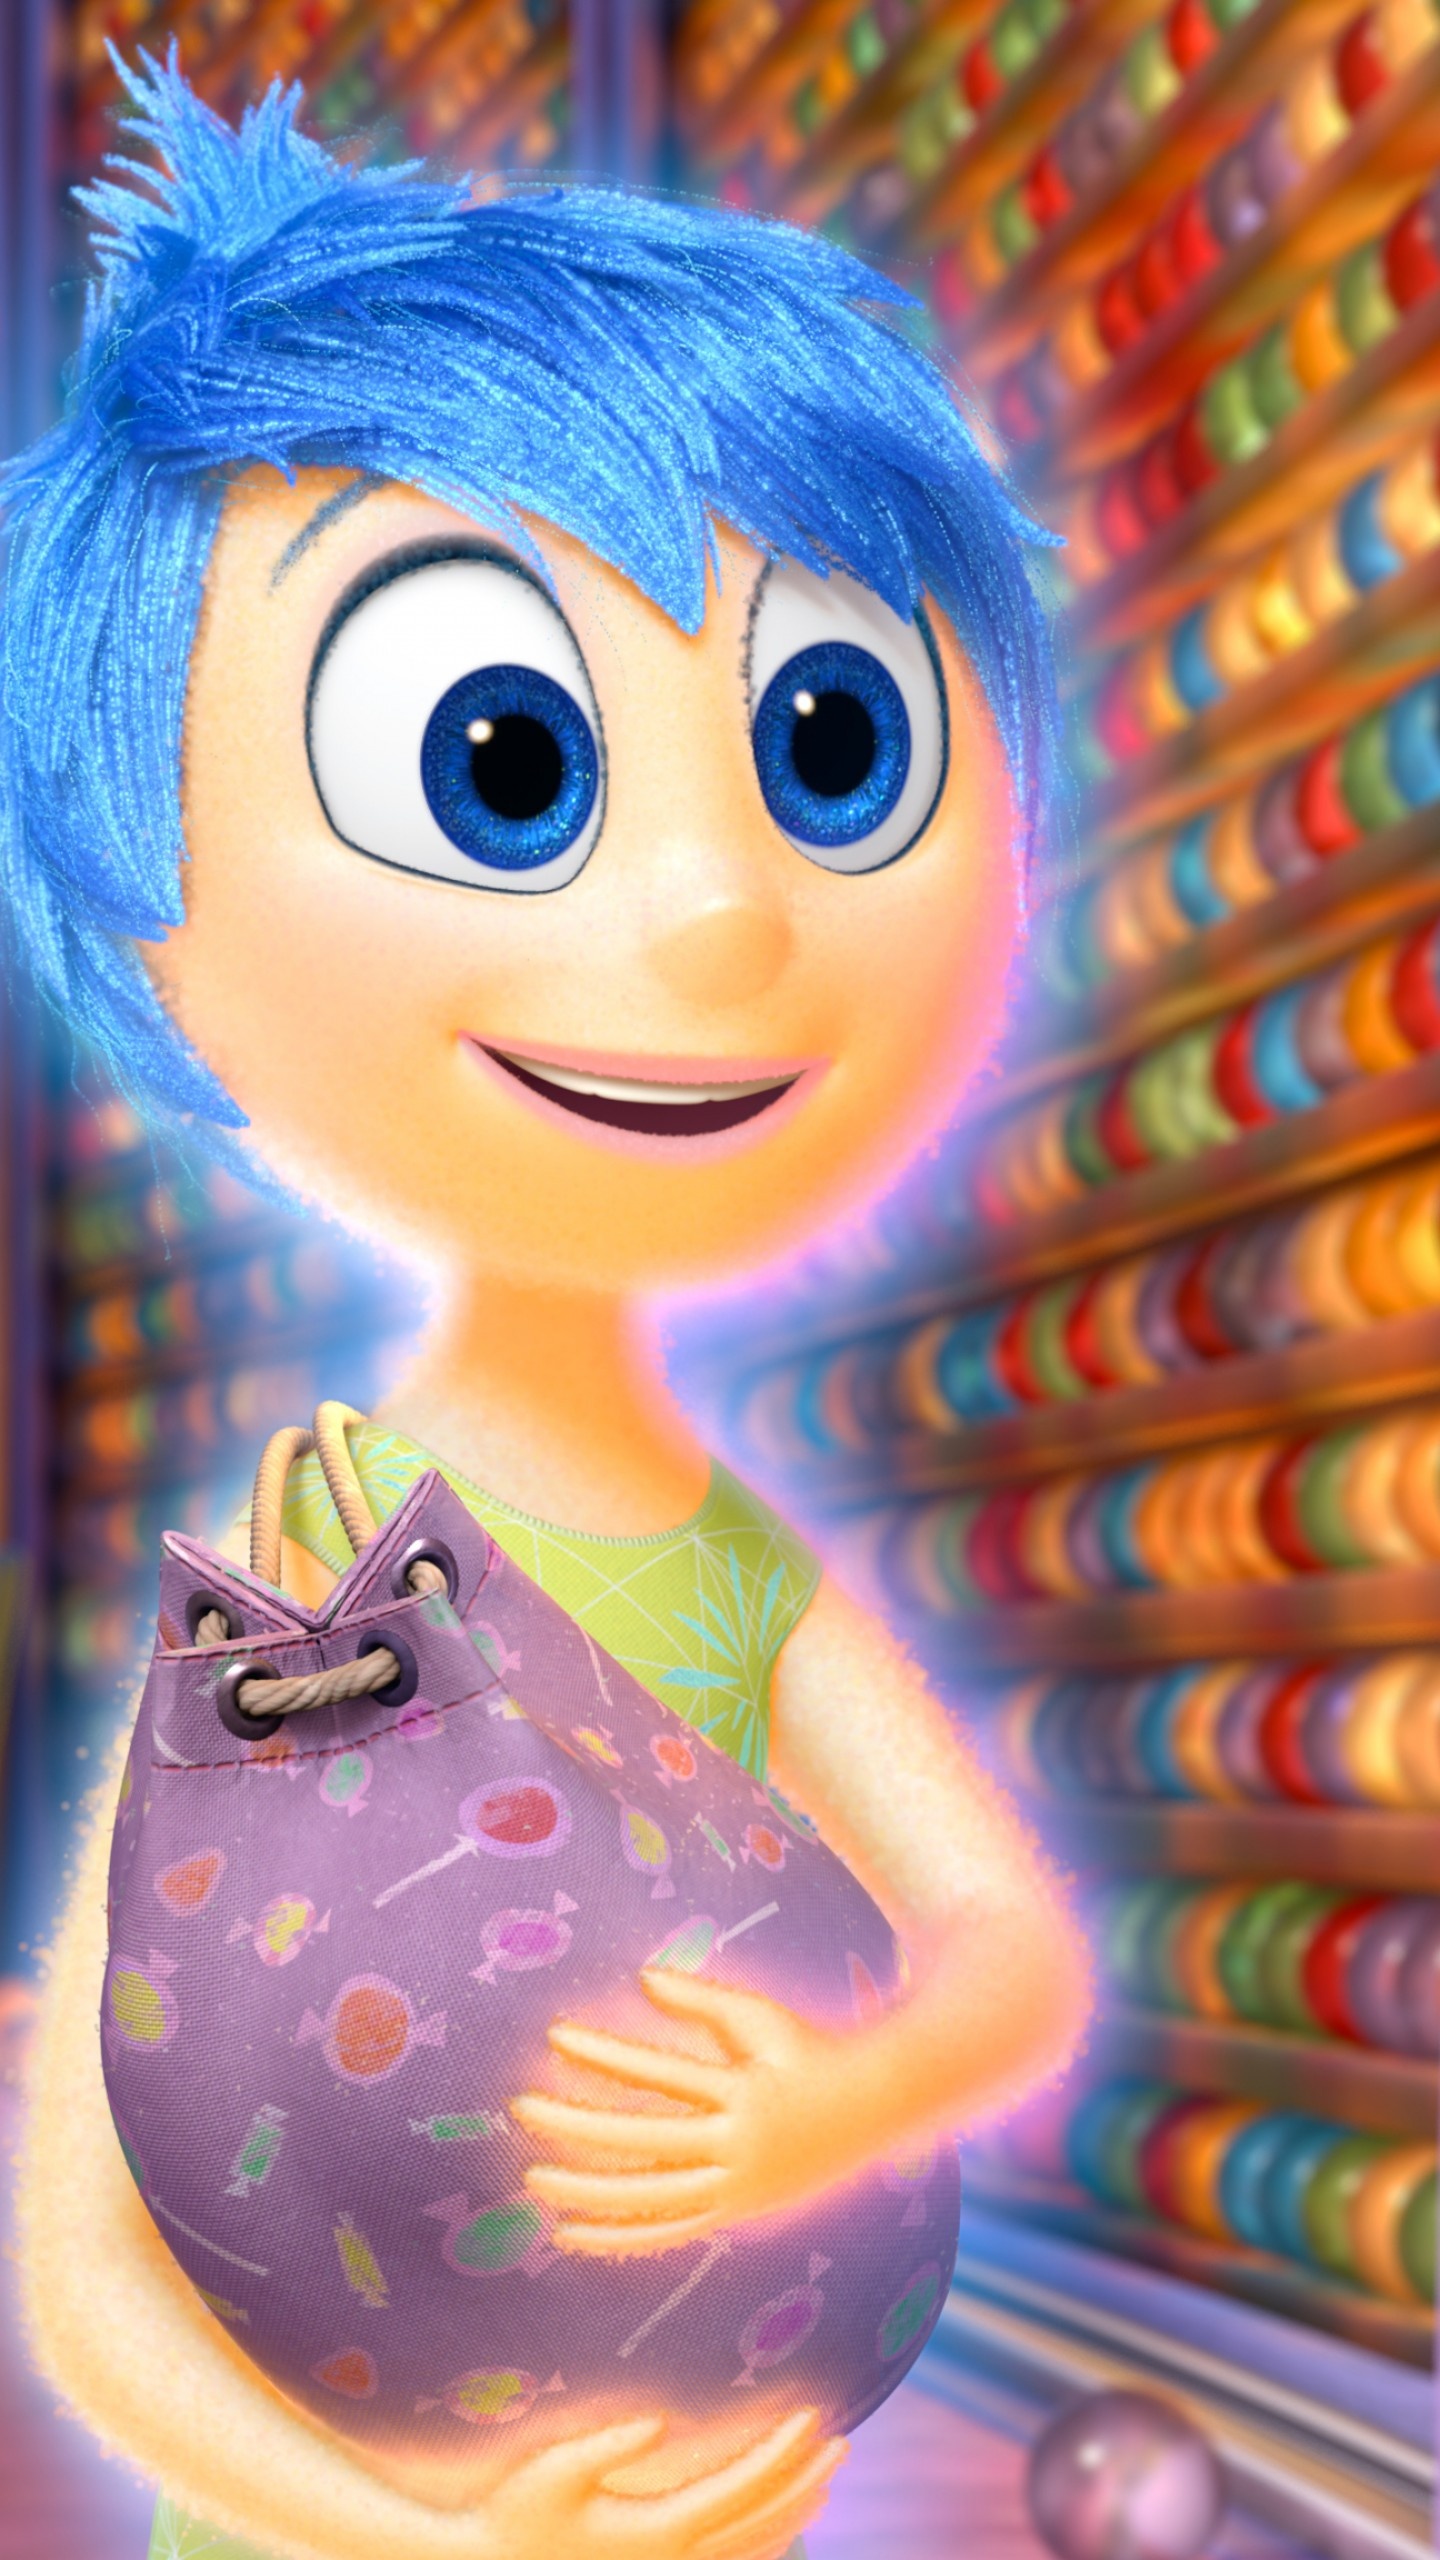 Wallpaper Inside out, best movies of 2015, cartoon, Movies #4813 1440x2560